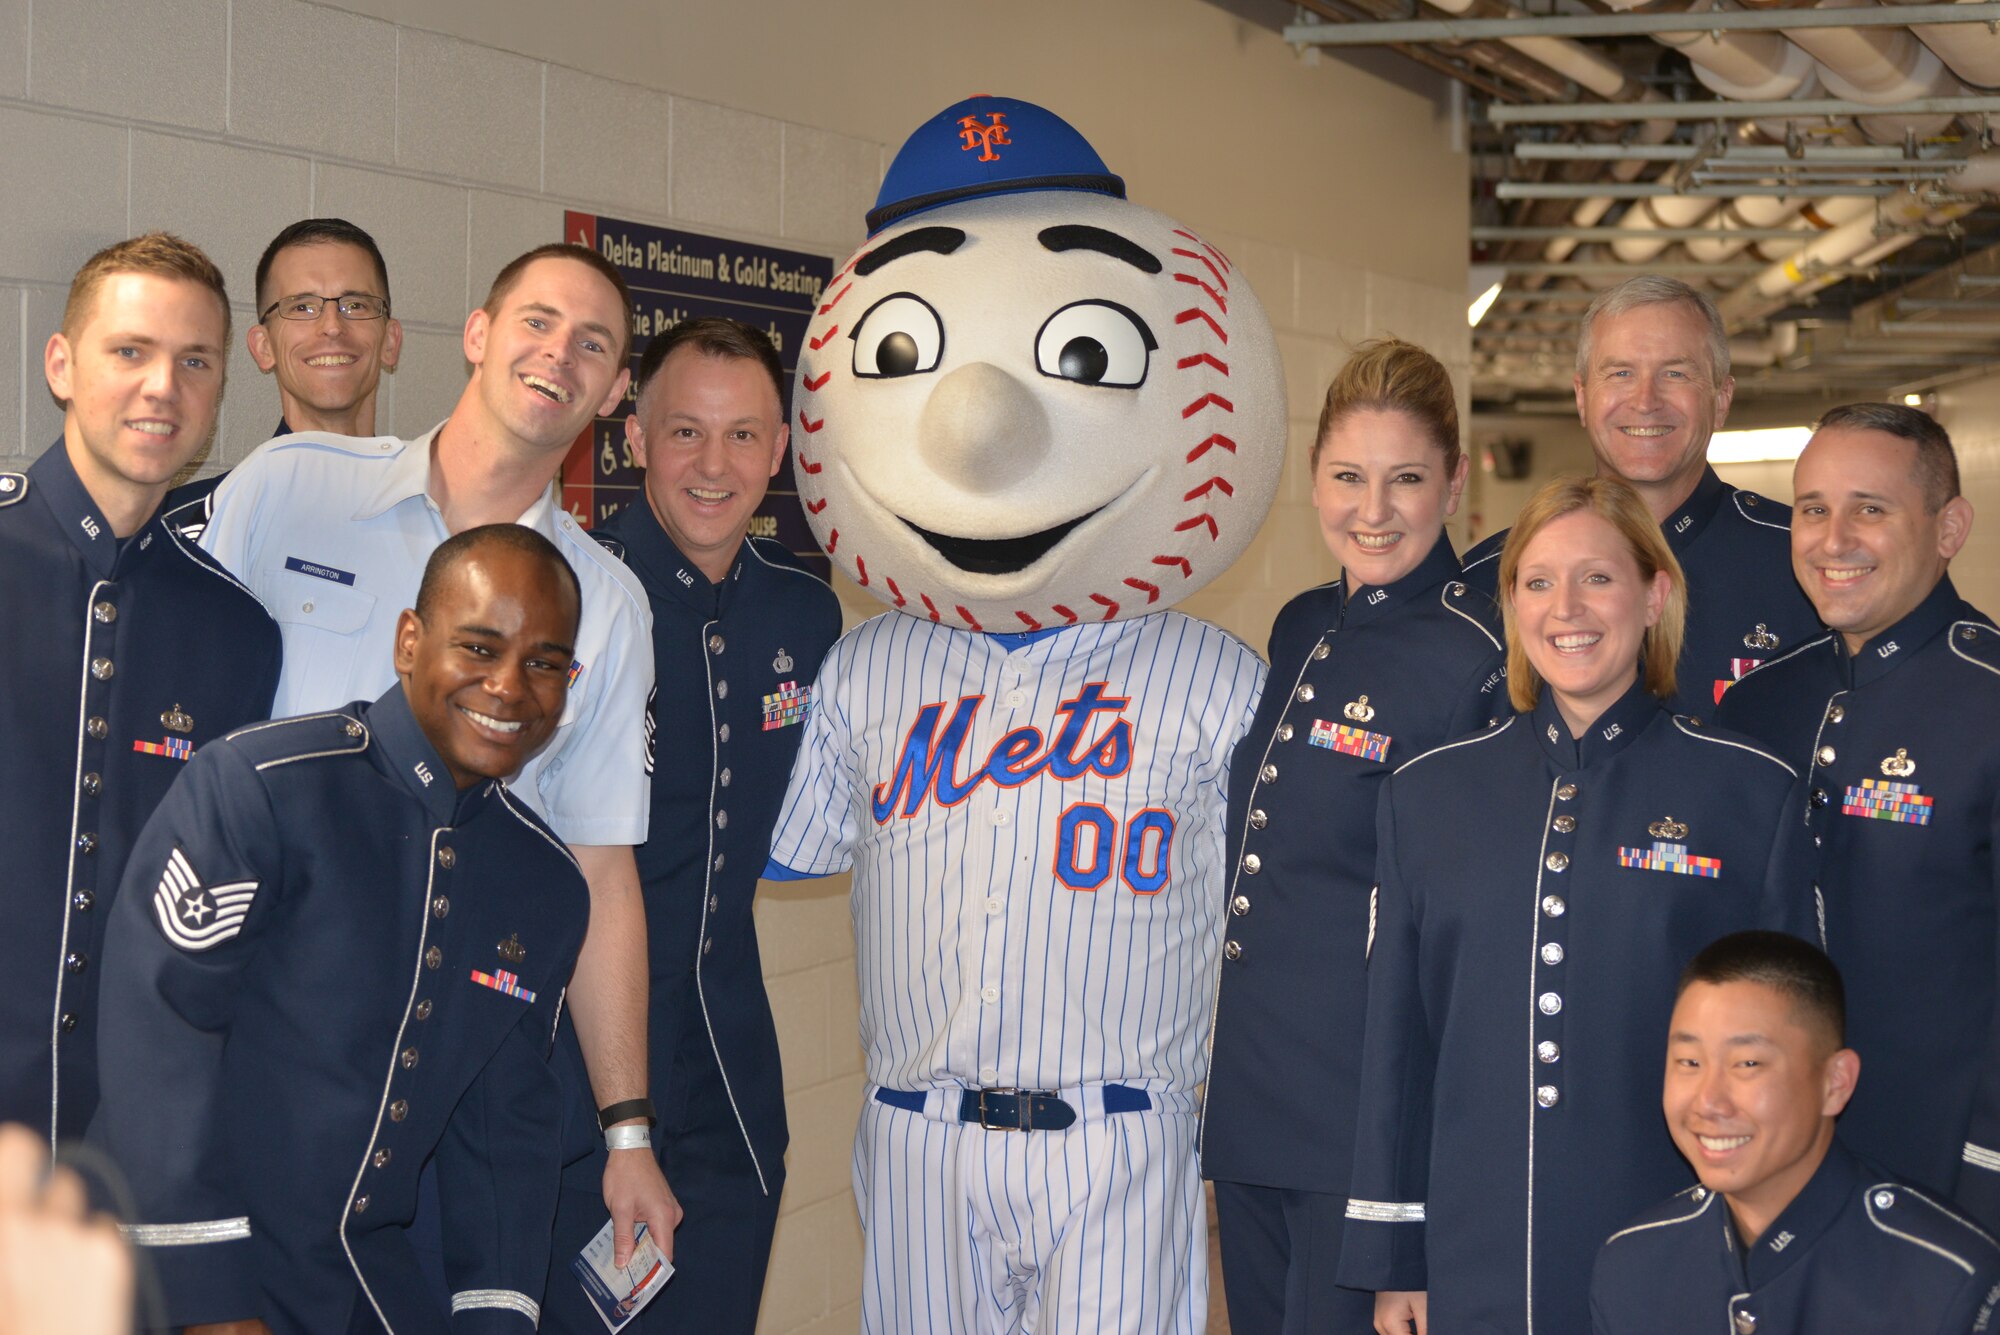 Members of the Singing Sergeants pose with Mr. Met below New York City's Citi Field on July 2, 2015. The Singing Sergeants performed the National Anthem before the Mets’ game. This performance was part of a larger five-day tour in New York City to represent the Air Force on the nation's birthday (U.S. Air Force photo/1Lt. Esther Willett).